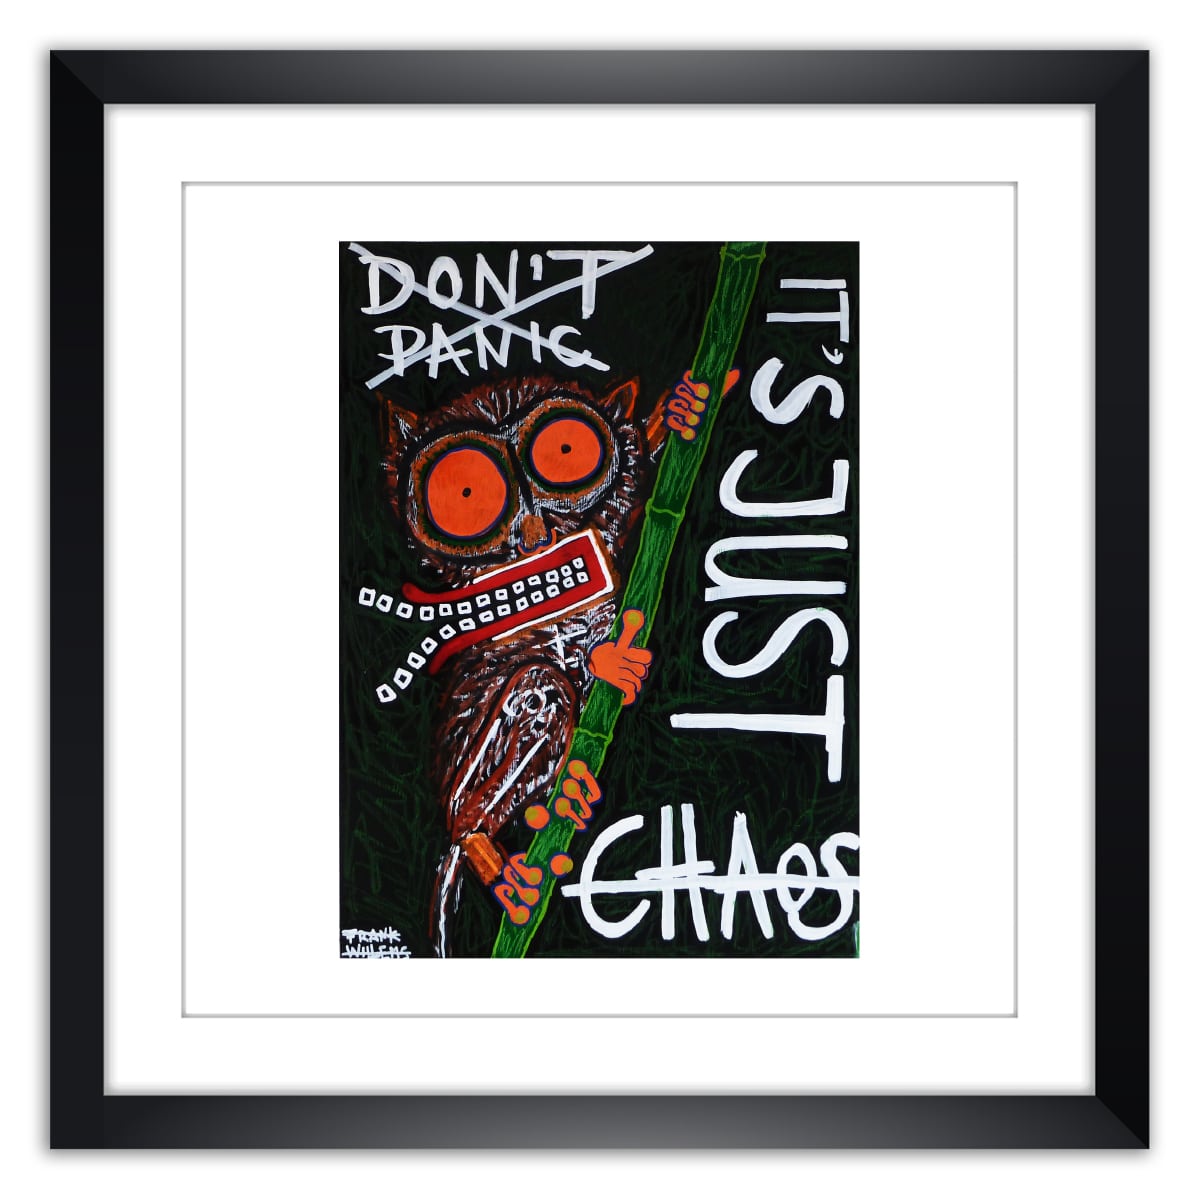 Limited prints - DON'T PANIC framed - Frank Willems